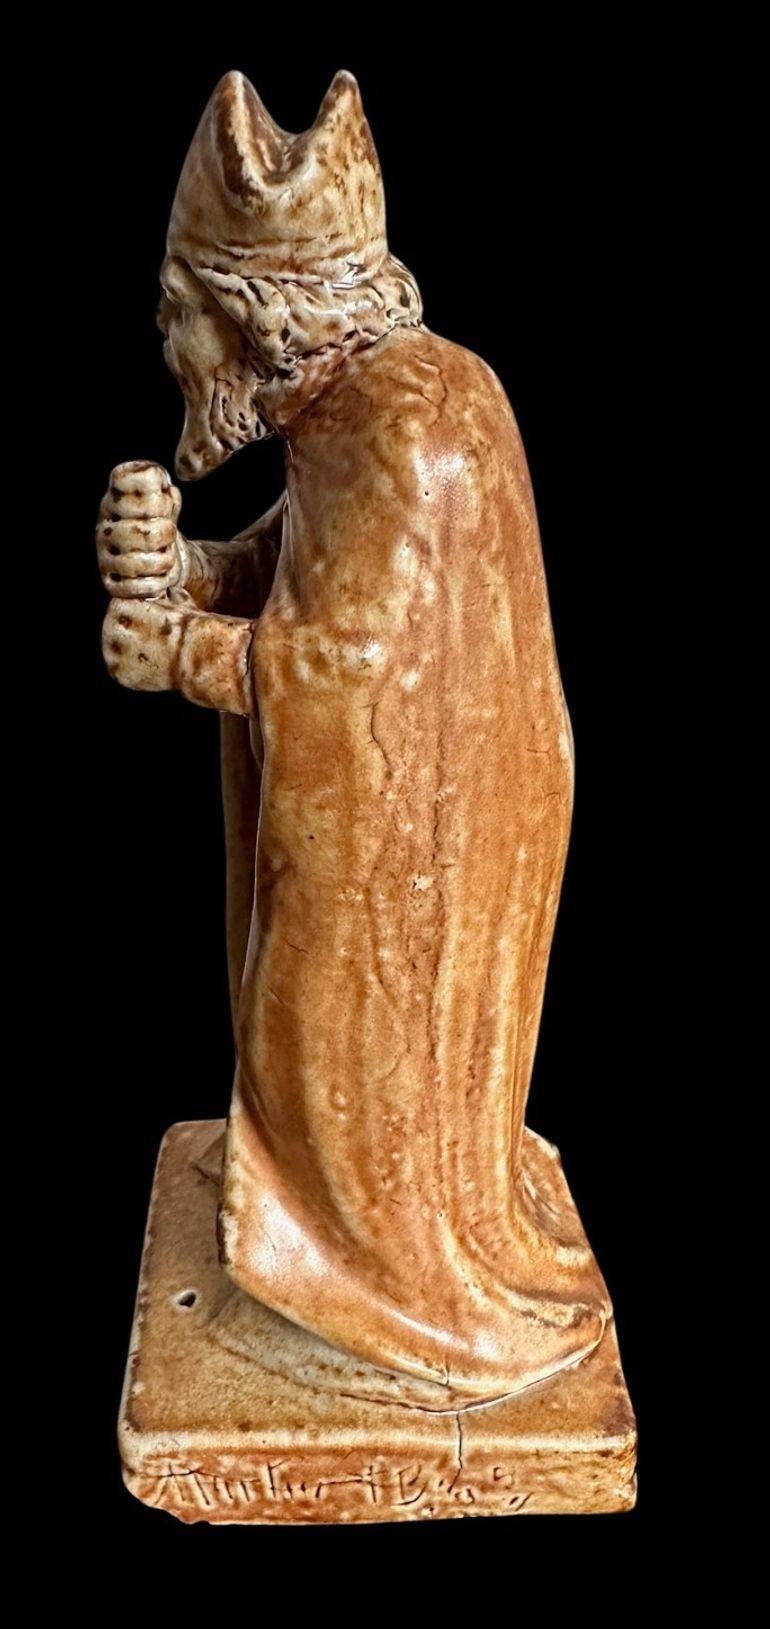 22
R W Martin for the Martin Brothers, a Chess Piece modelled as a Bishop
Lacking Staff and large chip to the plinth, several firing cracks
17cm high, 6.5cm wide, 6.5cm deep
Dated 1901